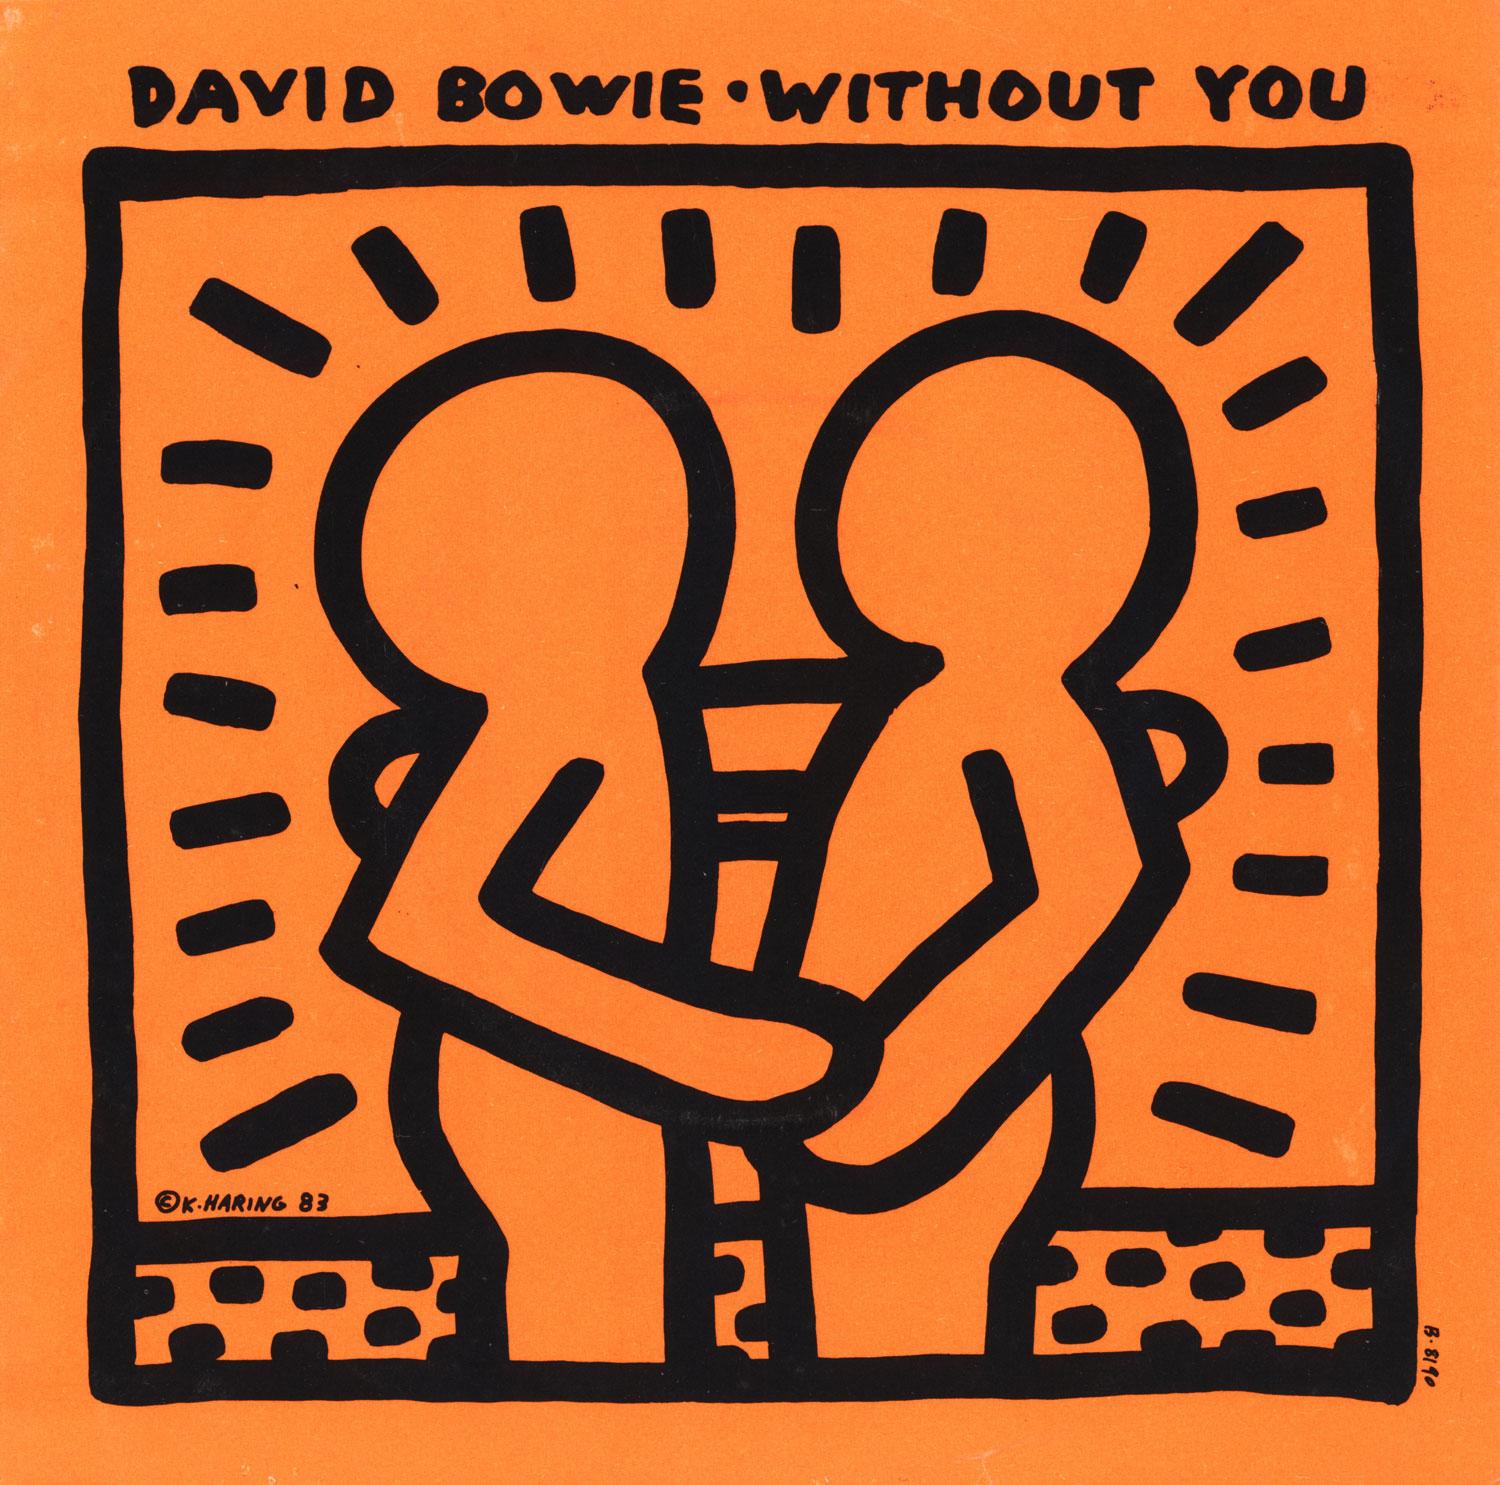 1980s Keith Haring Record Art:
David BOWIE "Without You" A Rare Highly Sought After Vinyl Art Cover featuring original cover artwork by Keith Haring. A rare example in very good overall vintage condition. 

Year: 1983.

Medium: Off-Set